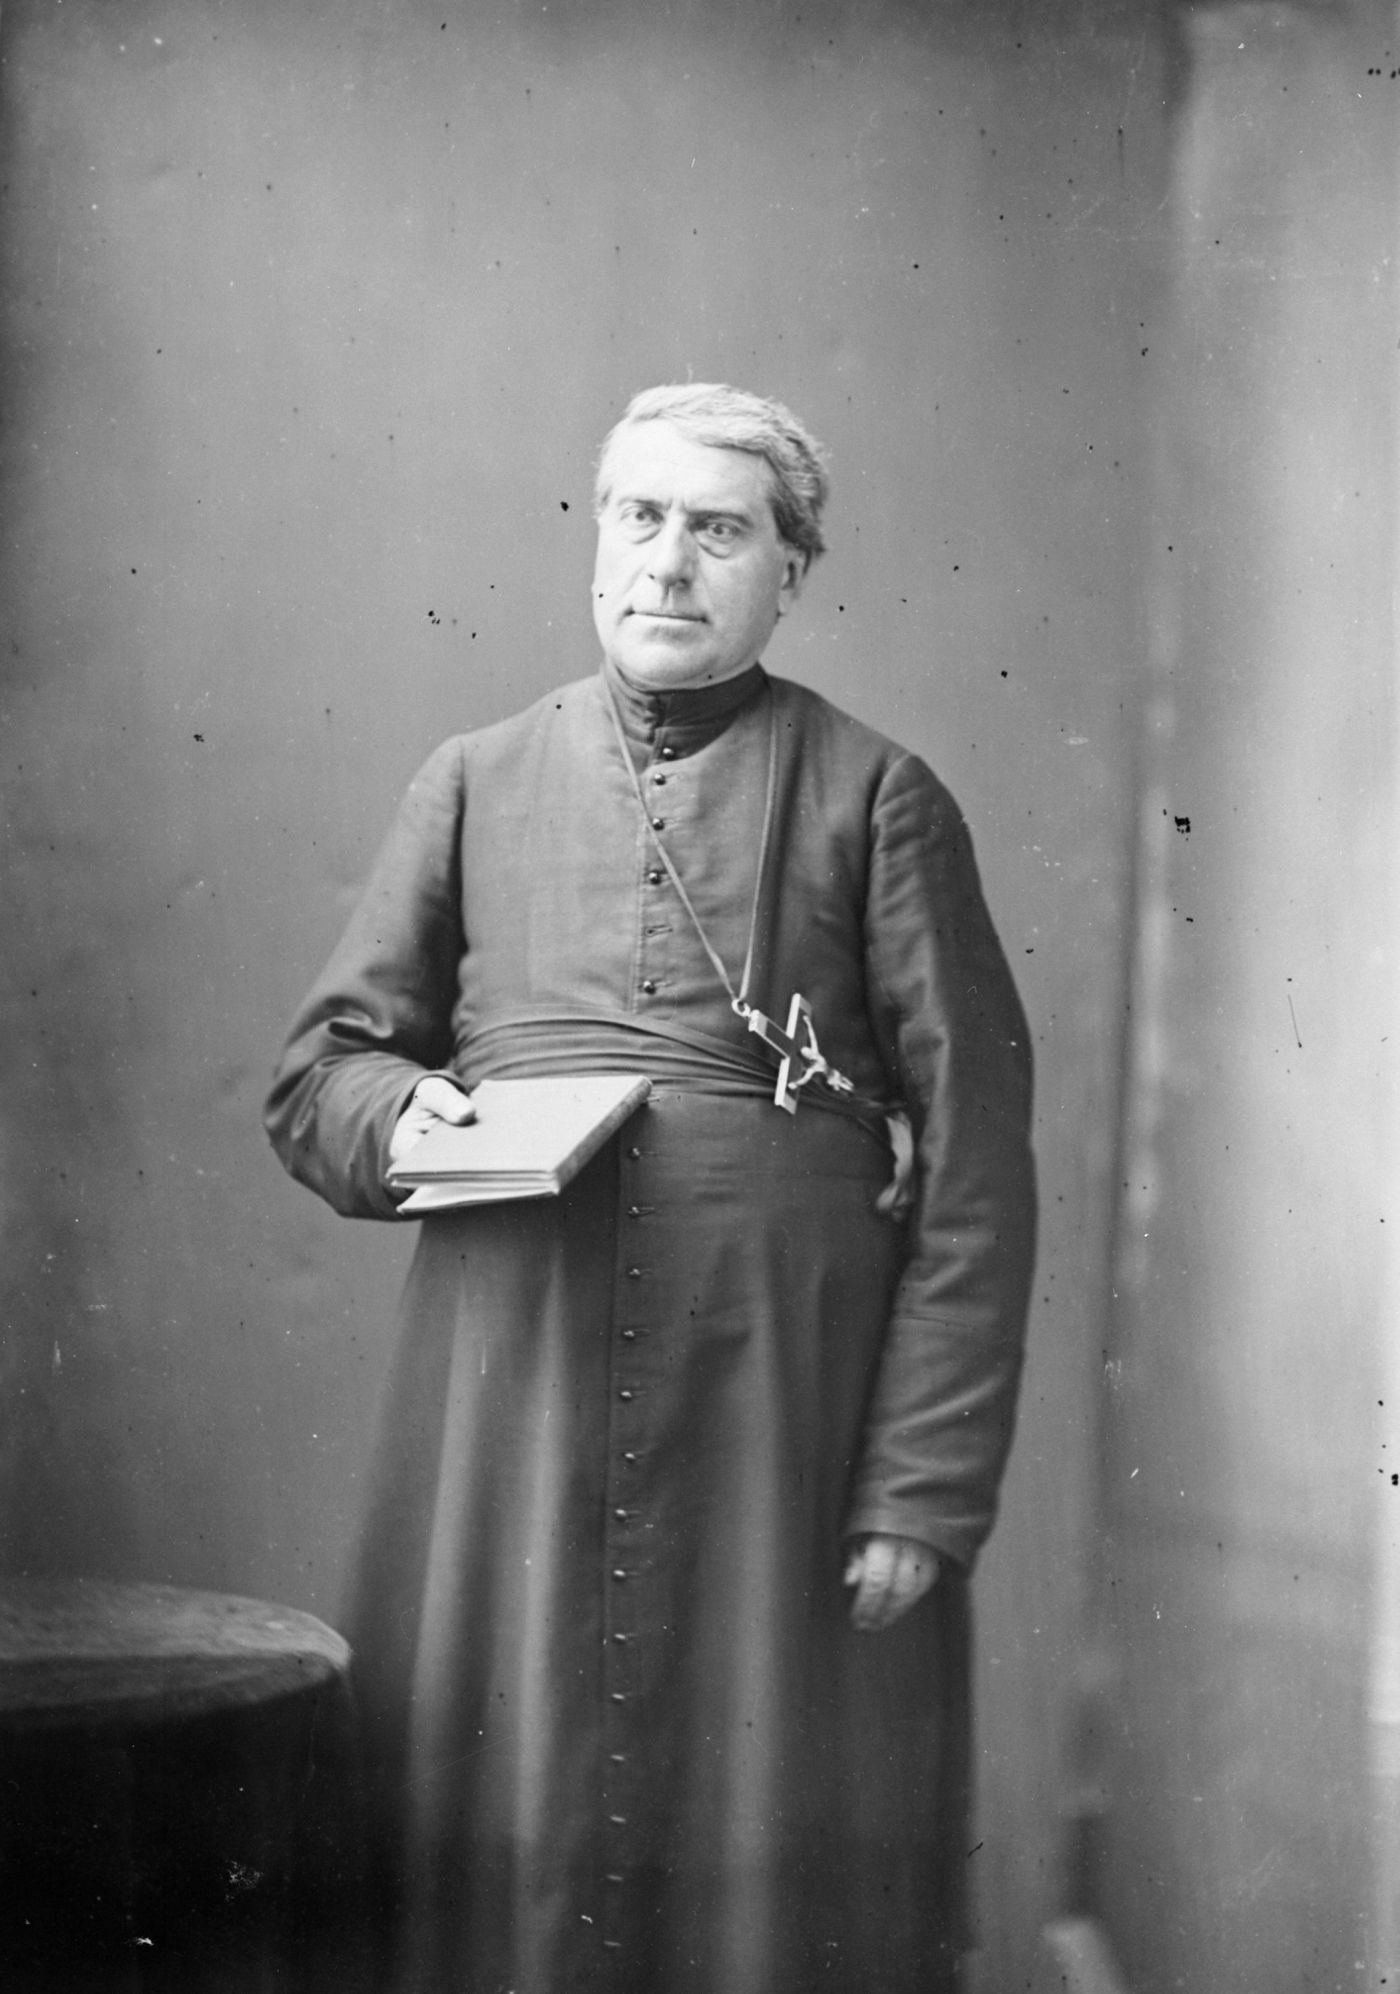 Black and white studio photograph of a mature priest wearing a cassock and a large cross. He is standing, holding a book in his right hand.